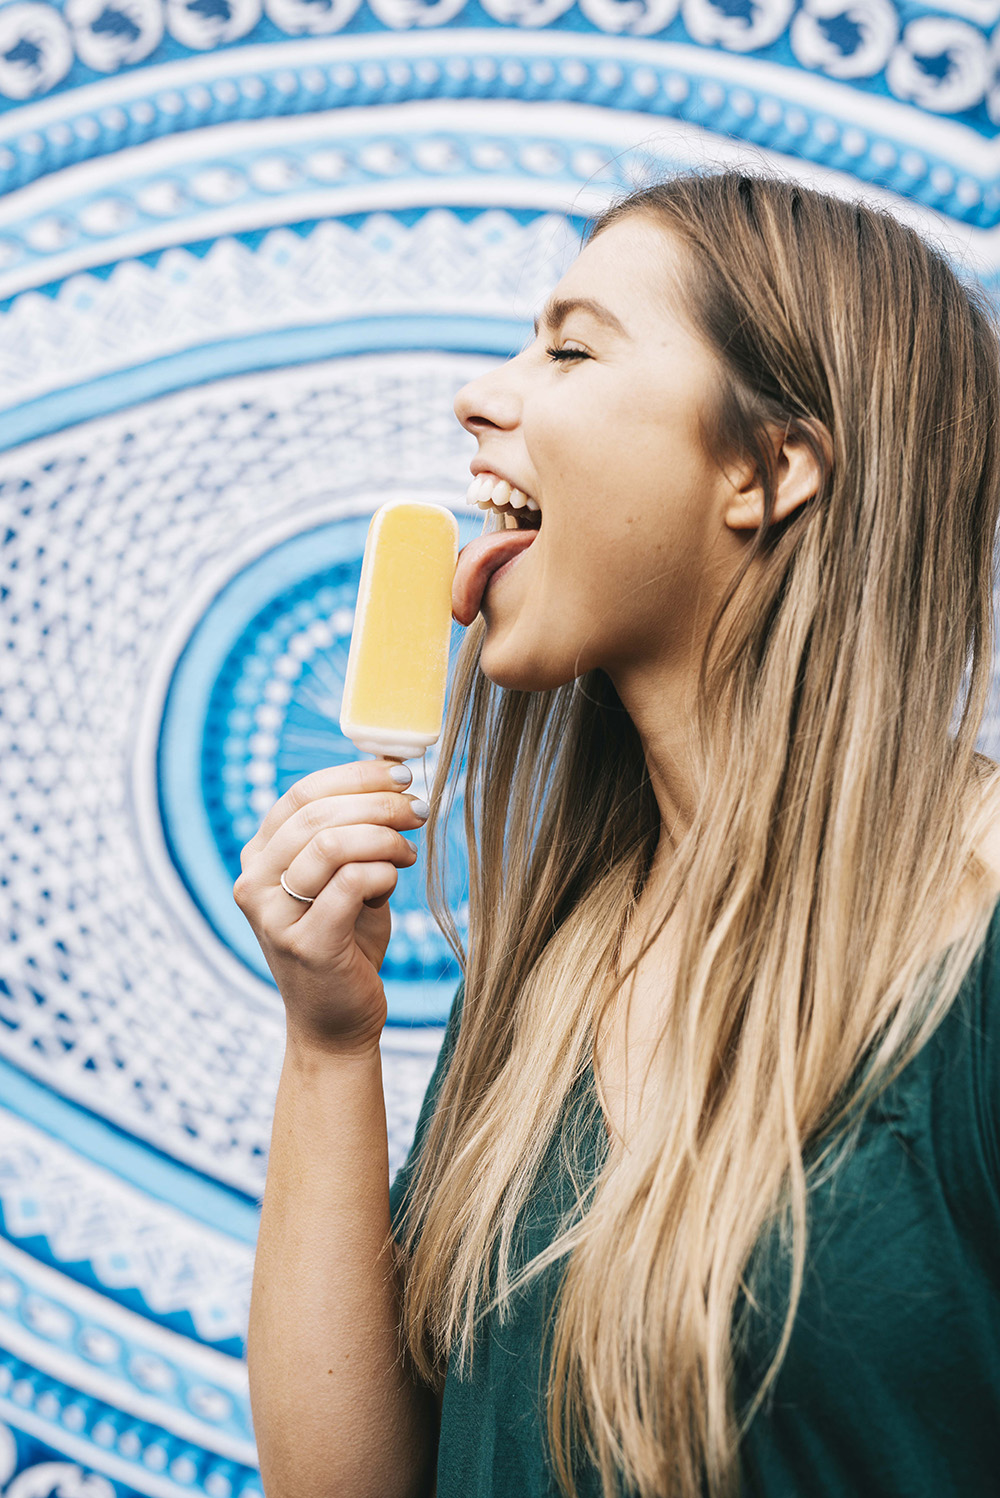 Woman licking Ice Lolly